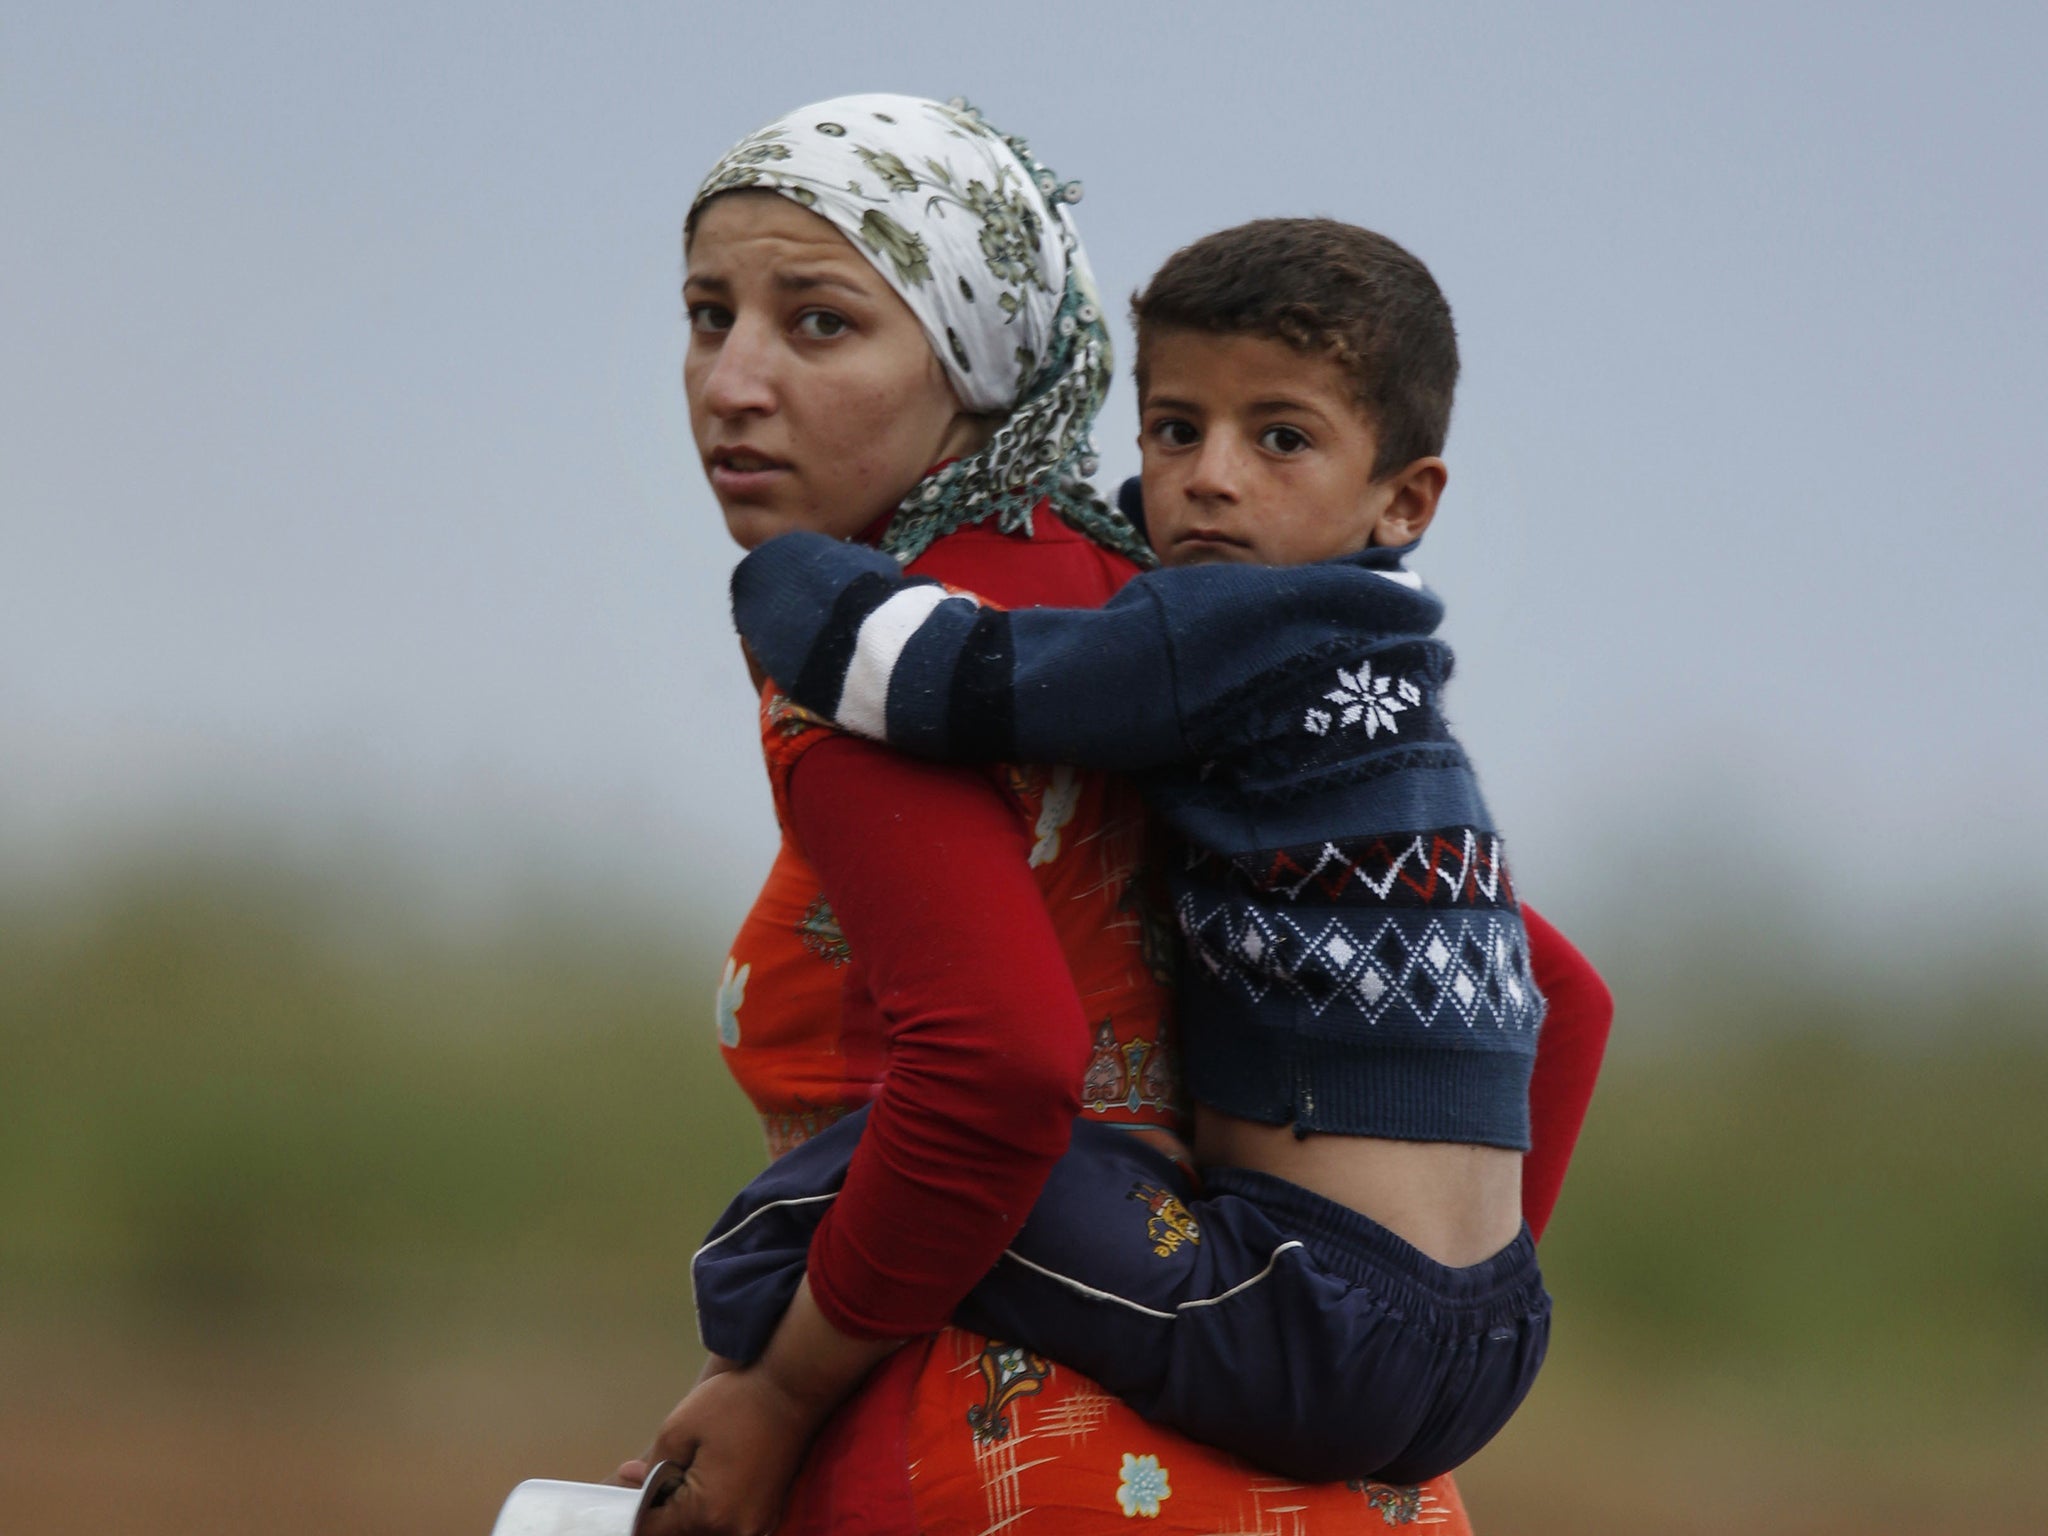 A Kurdish mother and son in the besieged town of Kobani